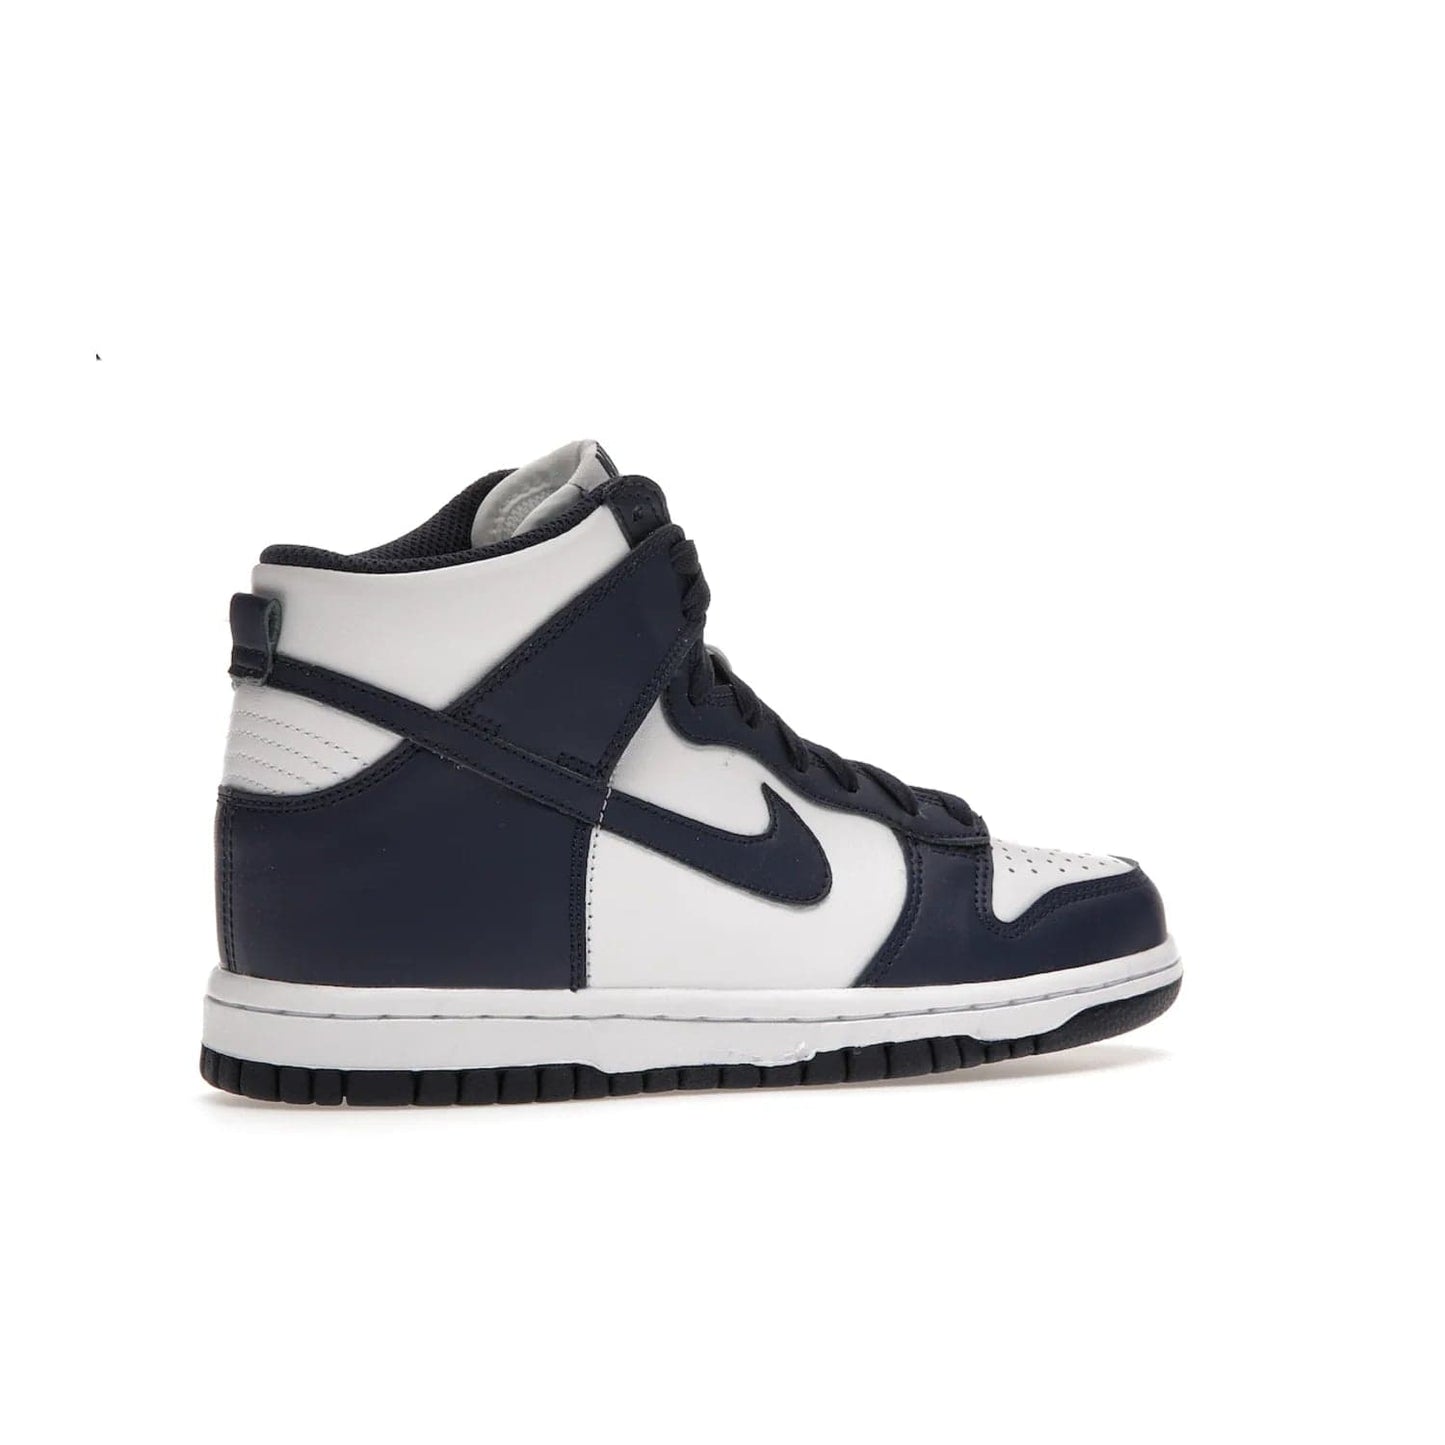 Nike Dunk High Championship Navy (GS) - Image 34 - Only at www.BallersClubKickz.com - Nike Dunk High Championship Navy GS: classic leather, suede, synthetic upper, chunky midsole, rubber herringbone sole. White base overlaid with Midnight Navy for a stylish finish. Padded high-cut collar and signature Nike swoosh design. Step out in these shoes and make a statement. Comfort and style at its finest.